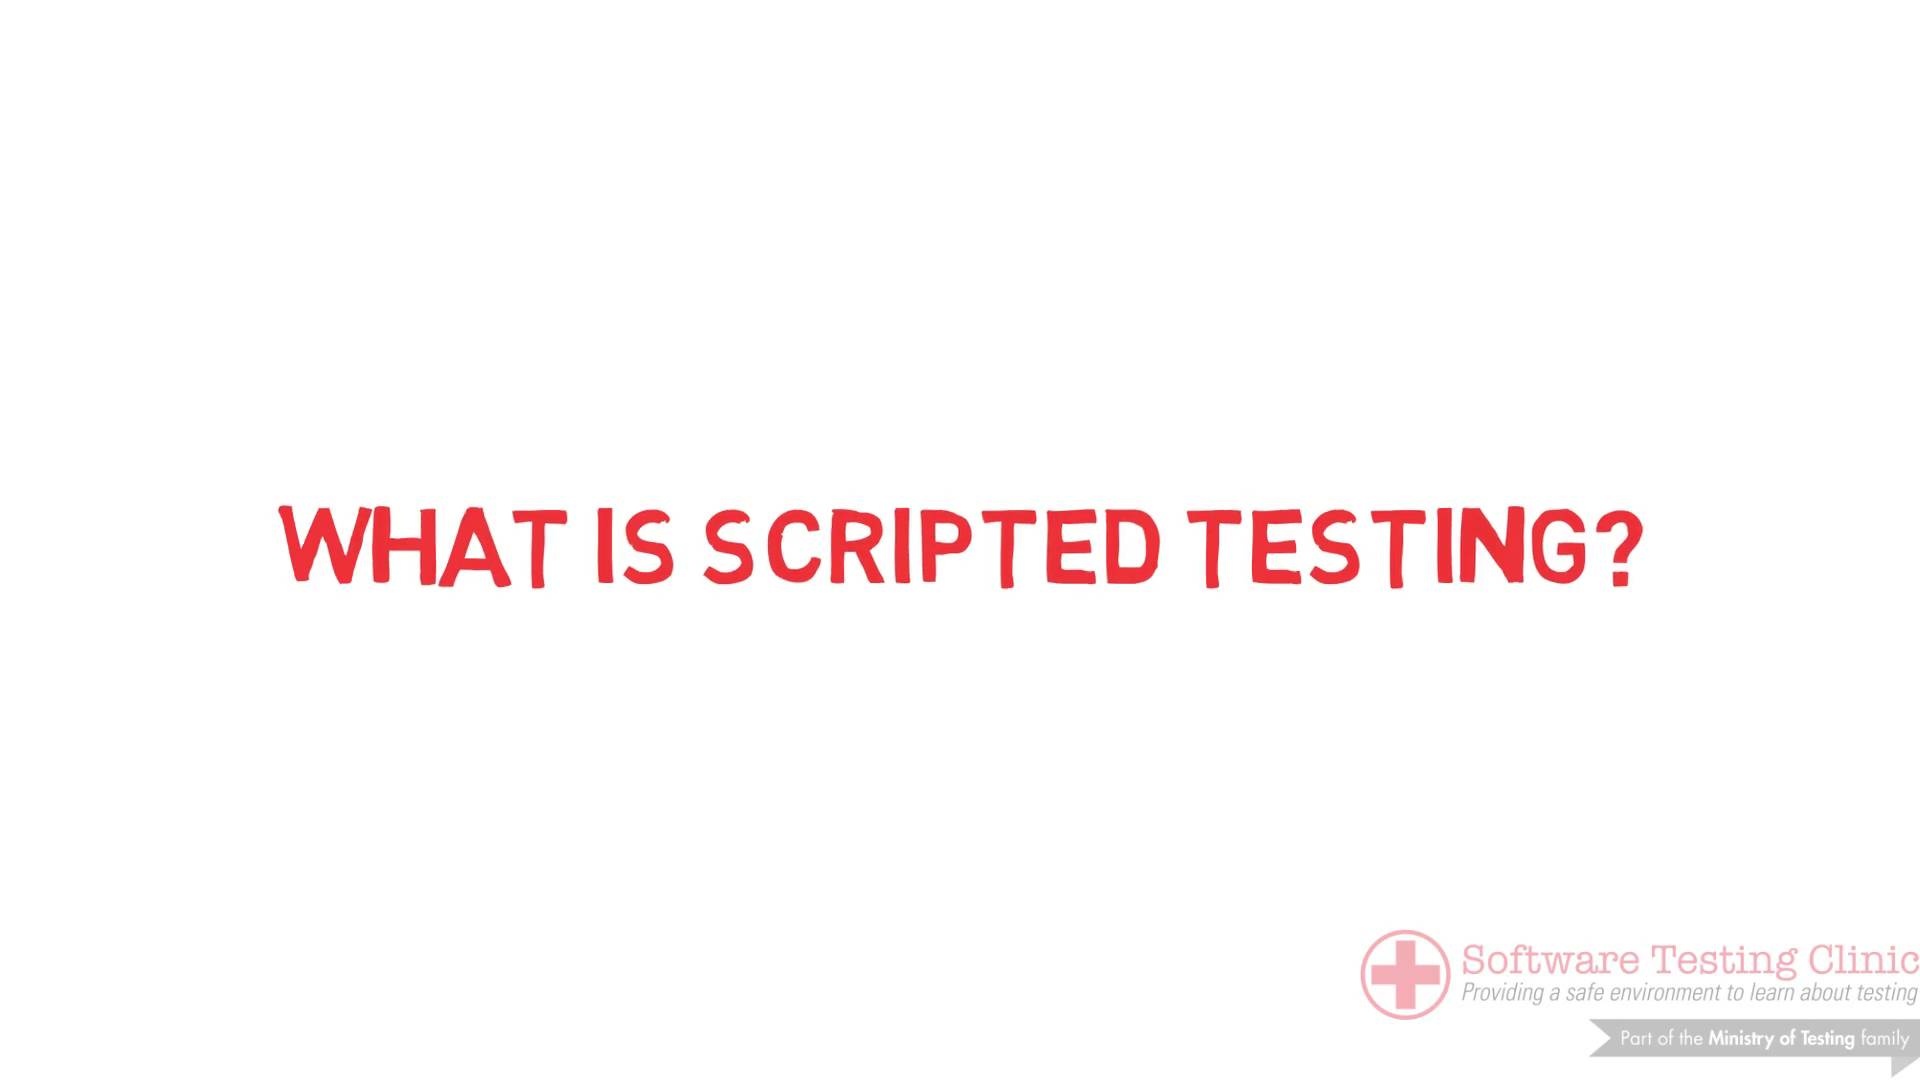 What is Scripted Testing?